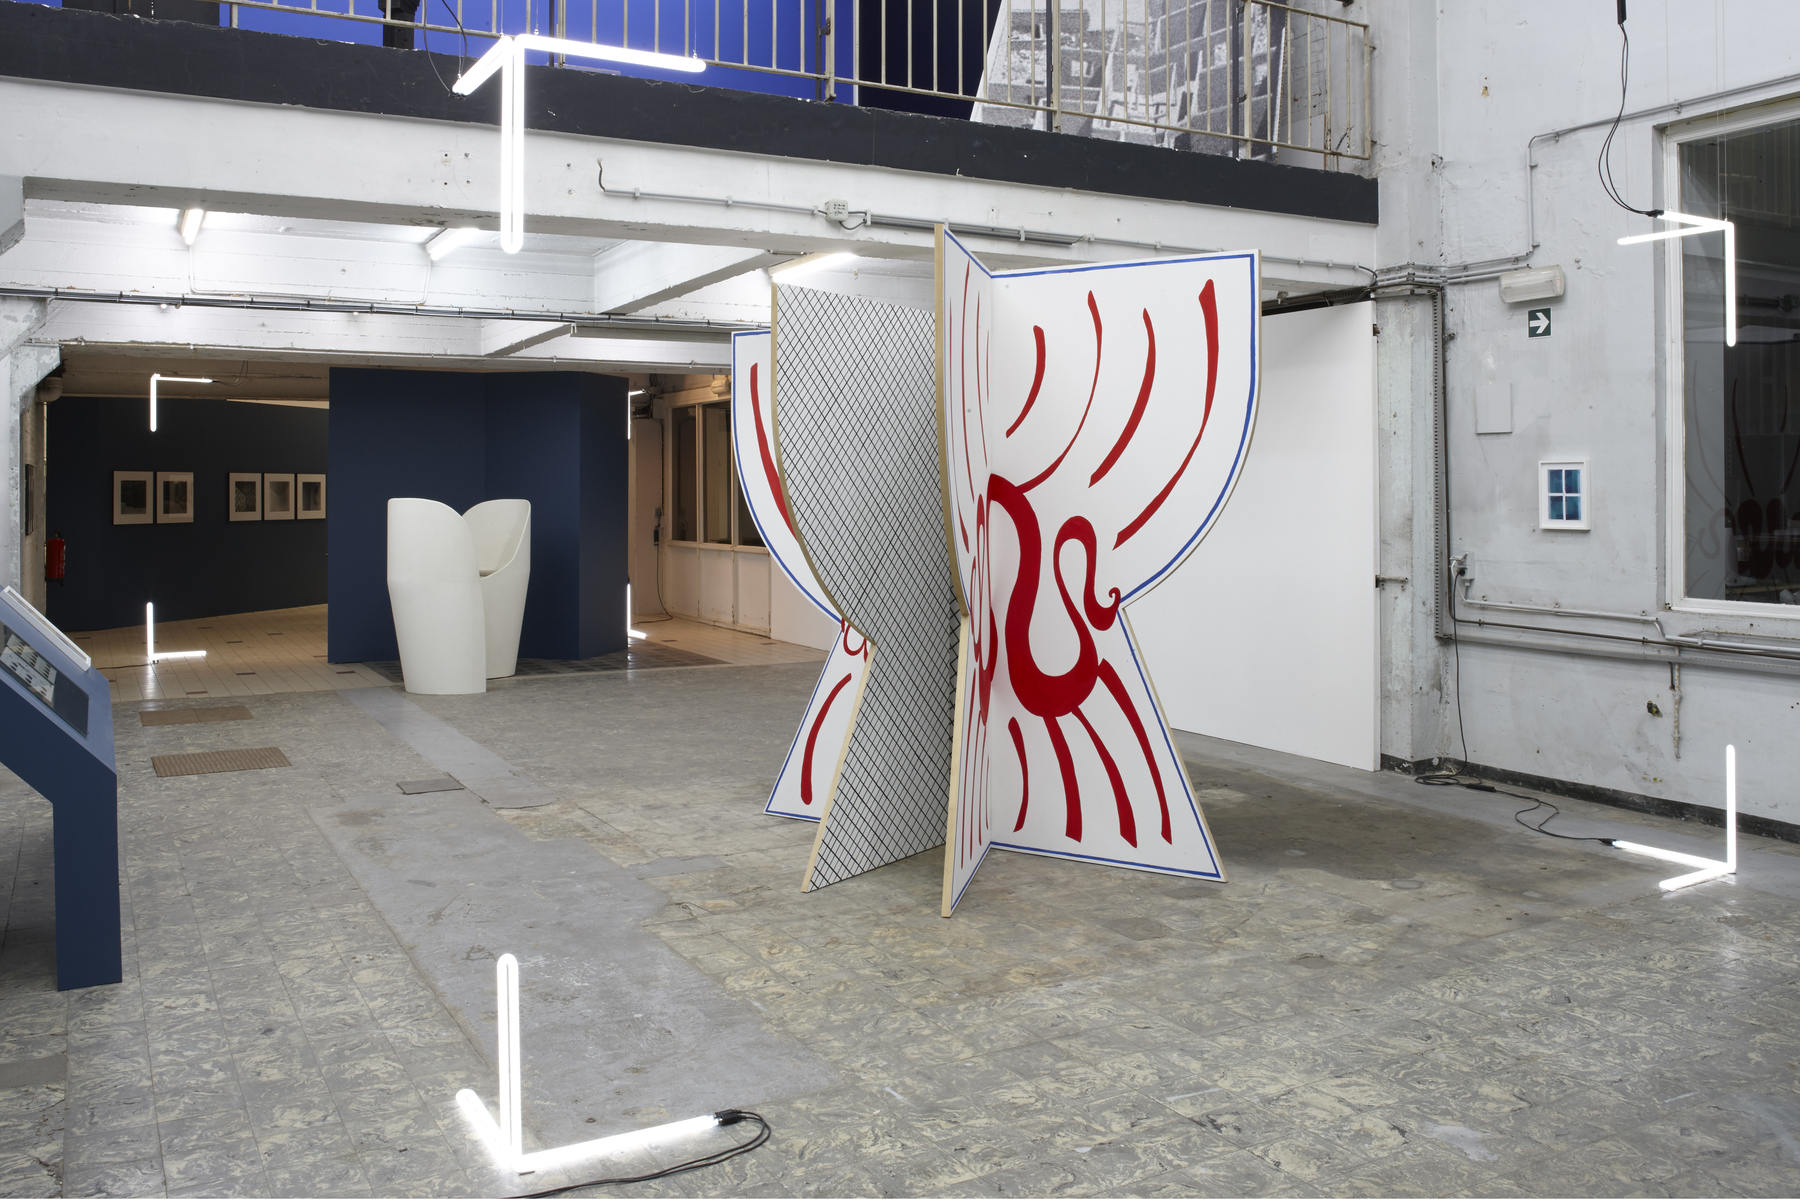 'The Corner Show’, installation view, Extra City Kunsthal, 2015 © Jan Kempenaers283